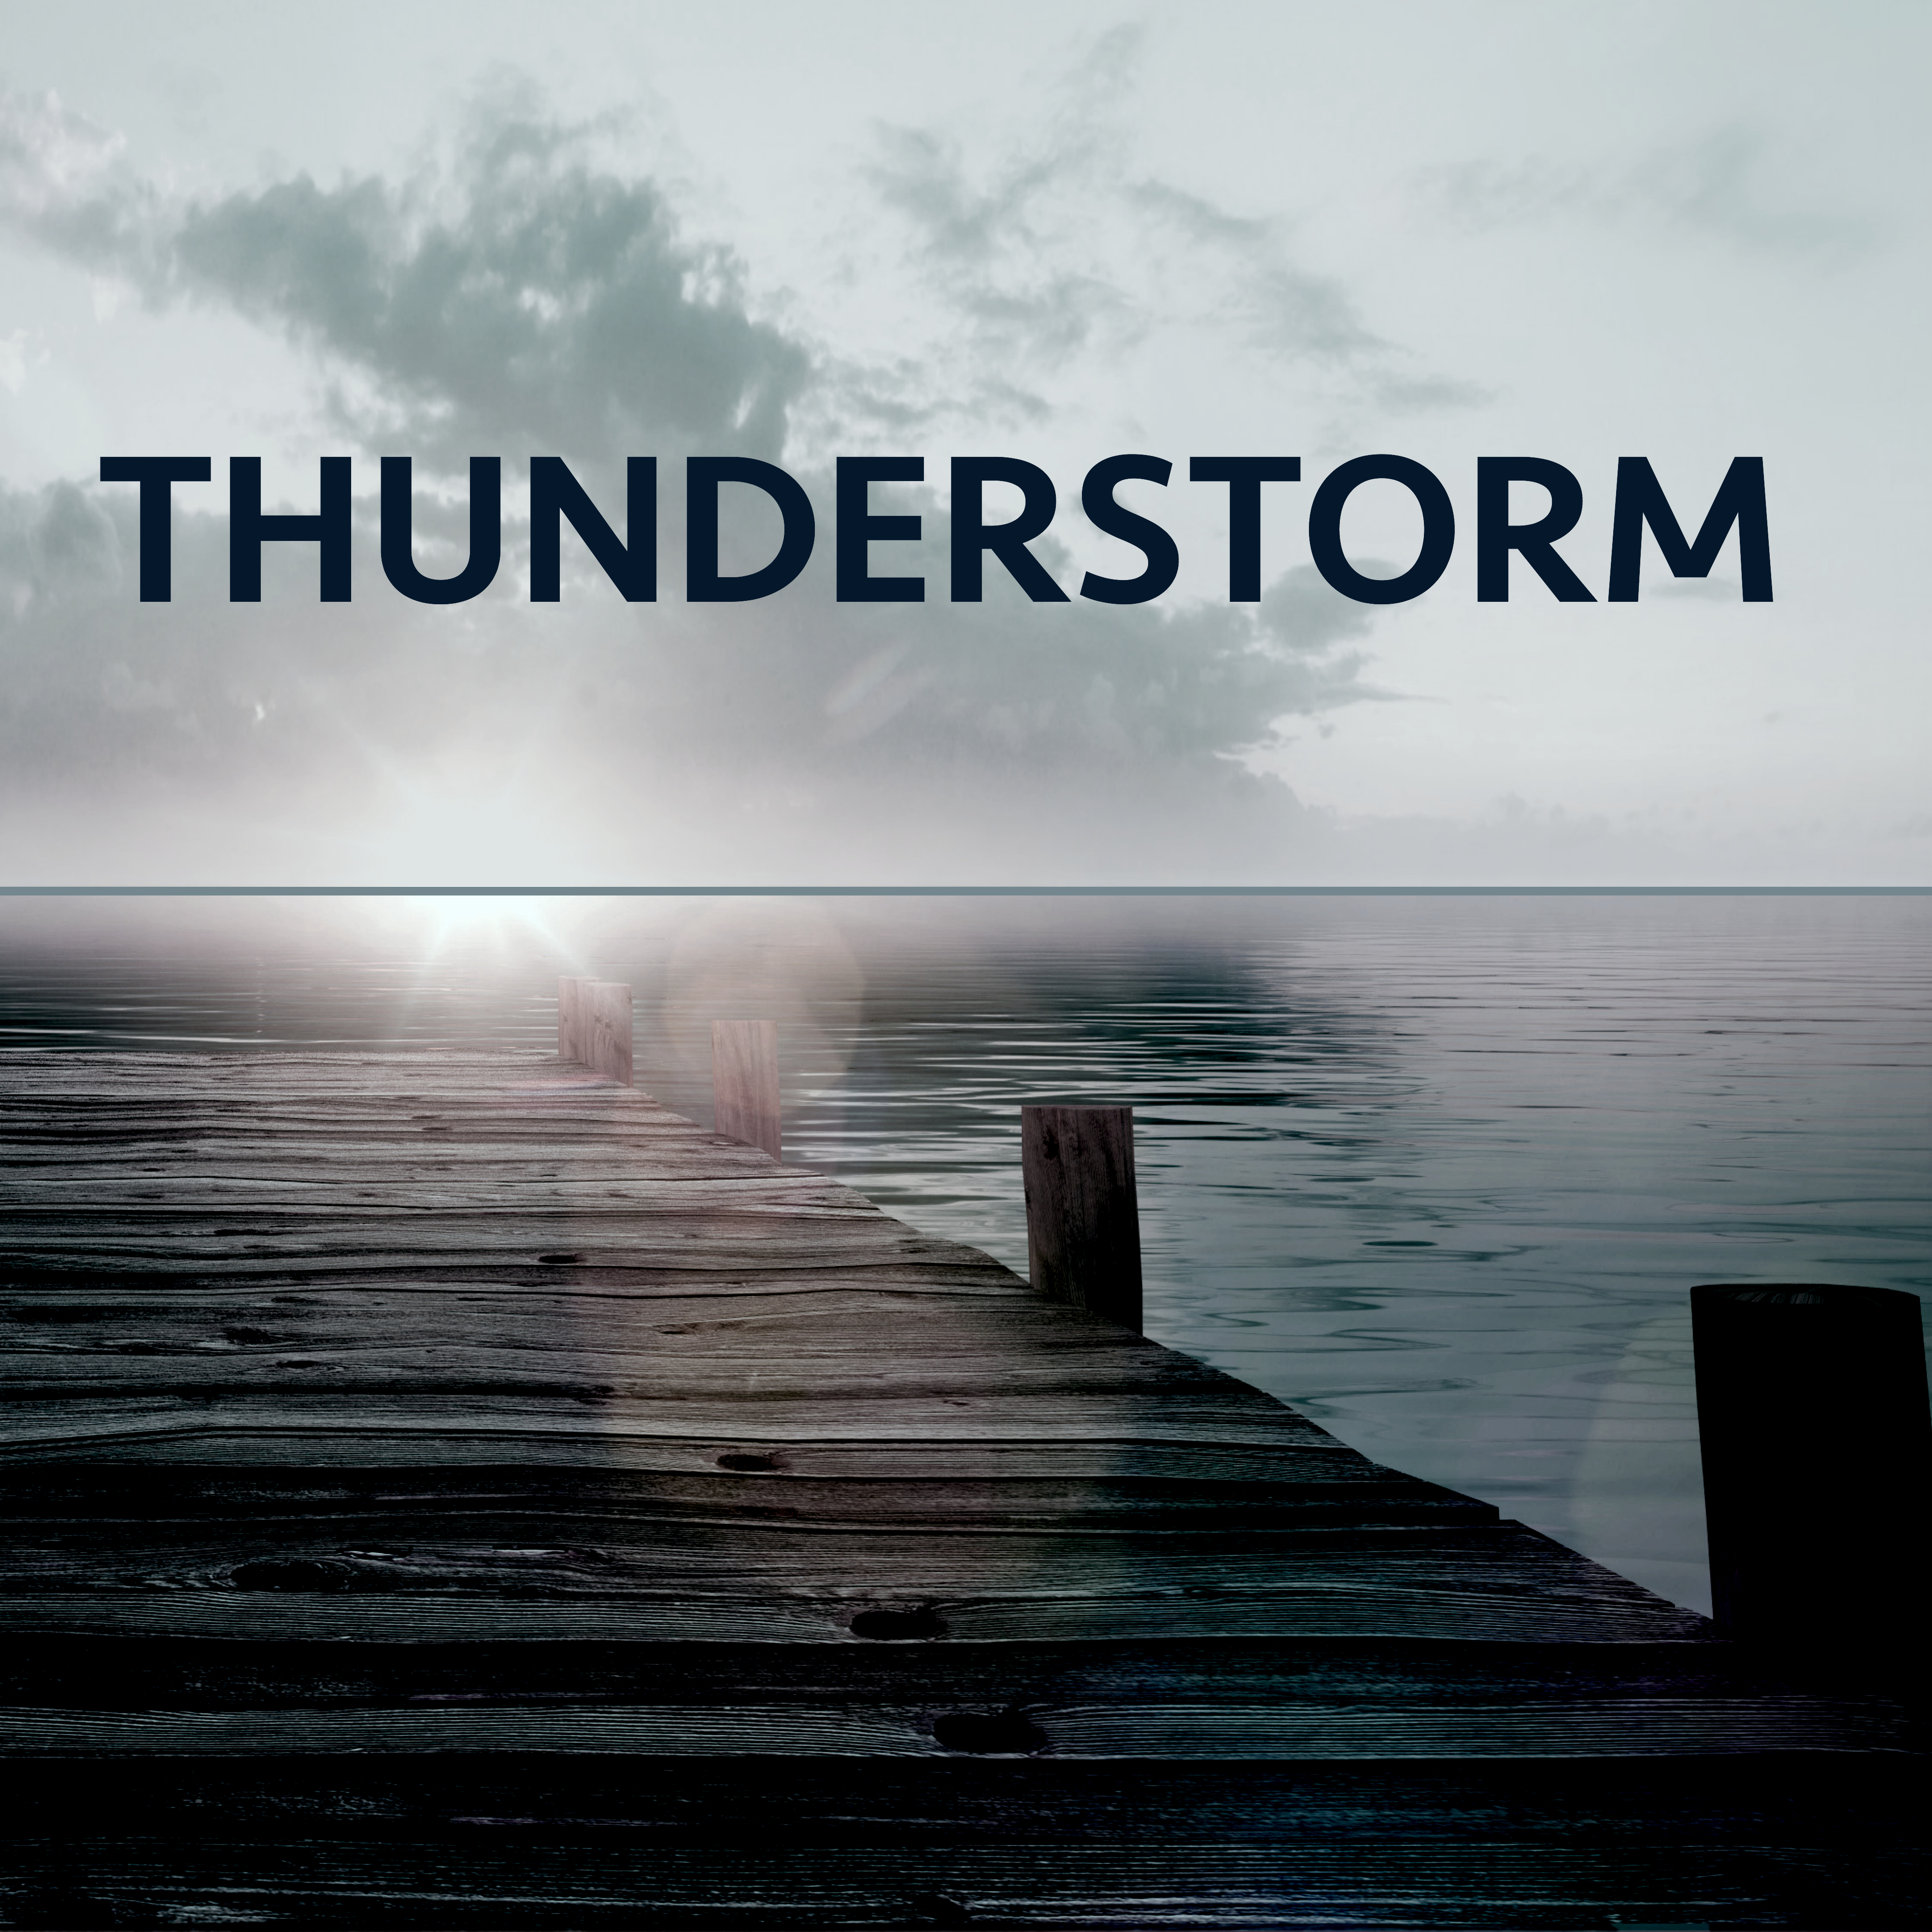 Thunderstorm - Relaxation Music, Relaxing Thunder Sound and Rain for Meditation, Yoga, Relaxation, Sound Therapy, Spiritual Healing, Massage, Relax, Chillout 3D Sound Effects Nature Sounds